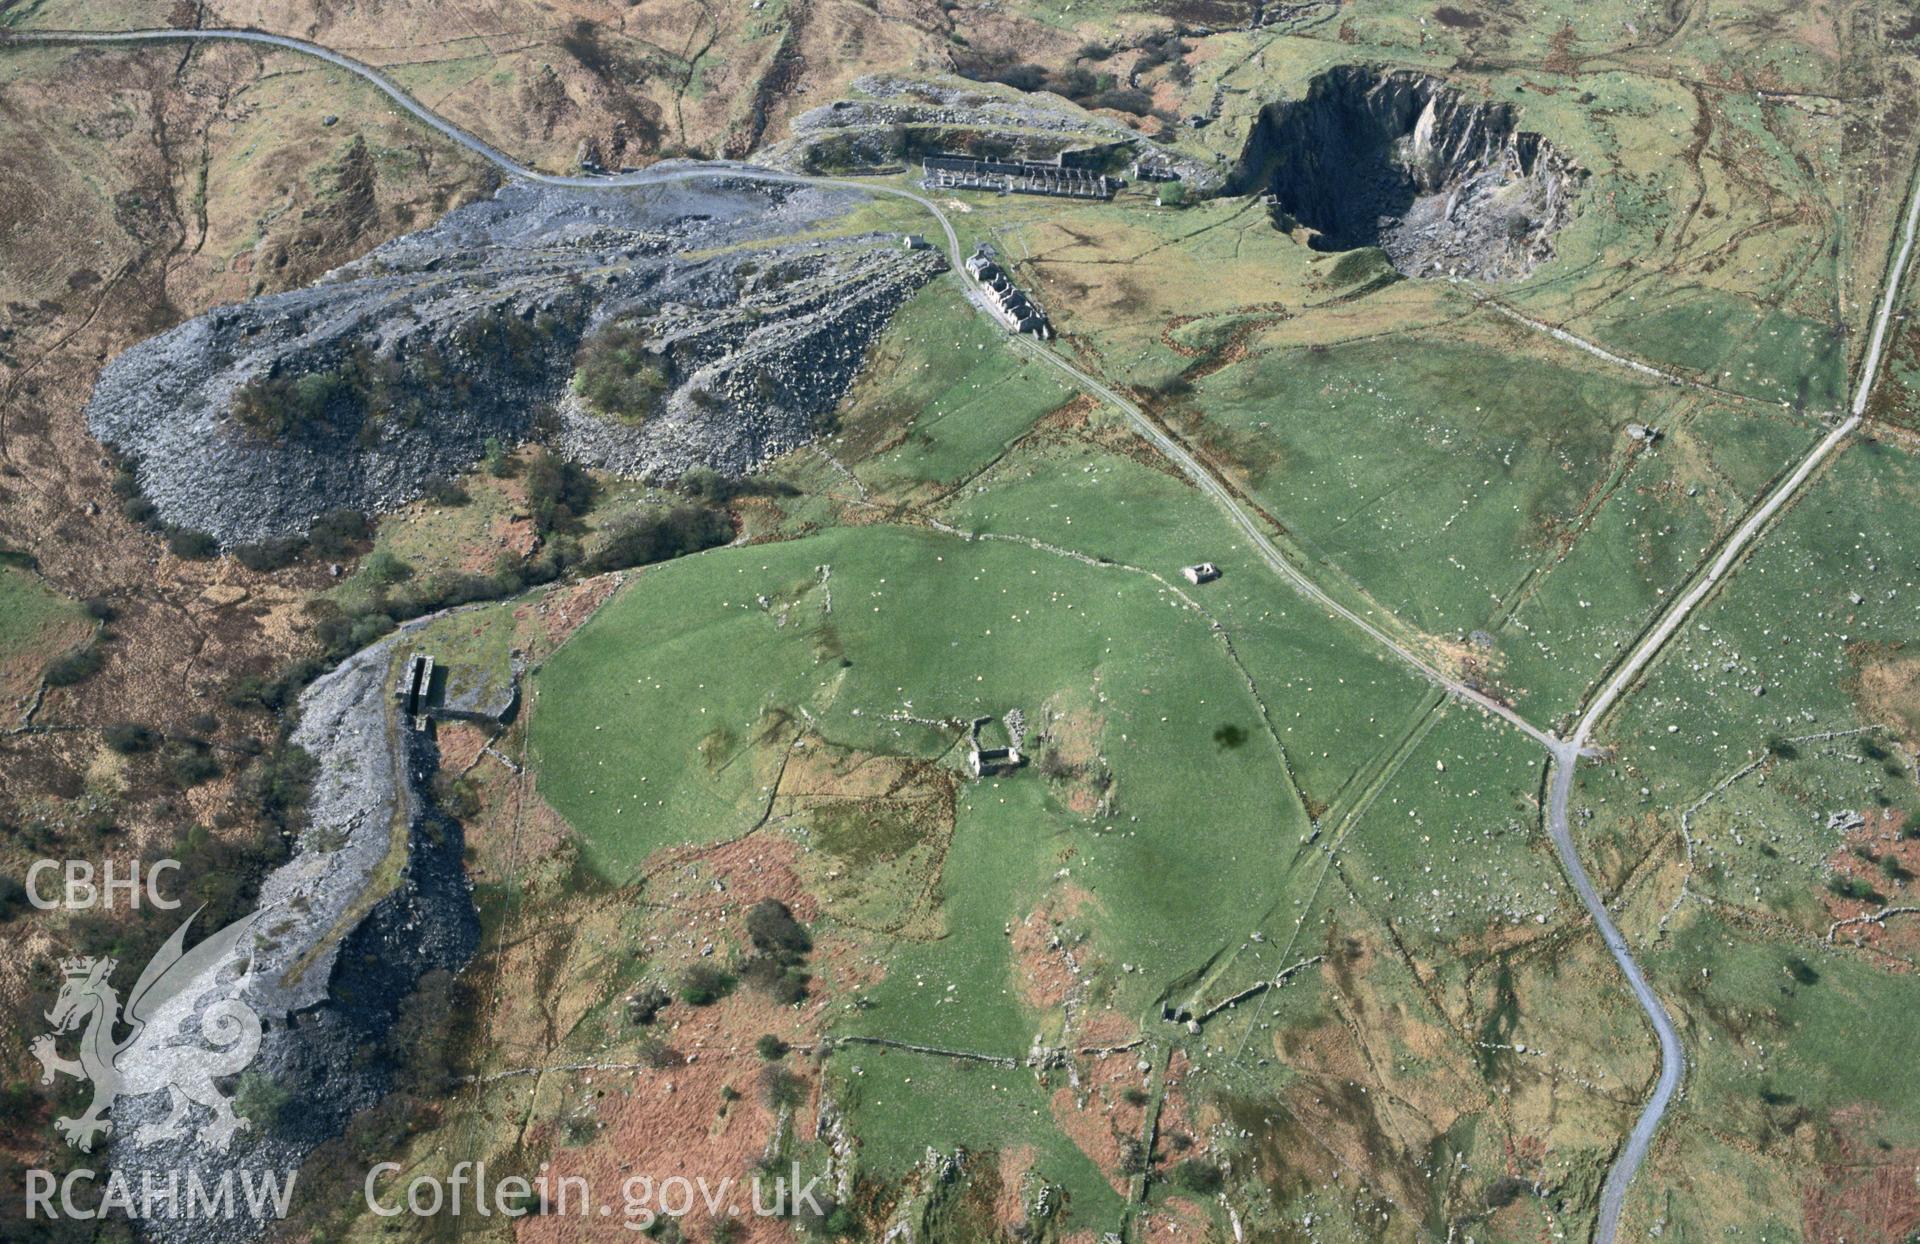 RCAHMW colour slide oblique aerial photograph of Rhos Quarry (Slate and Slab Works), Capel Curig, taken by C.R. Musson, 01/05/94